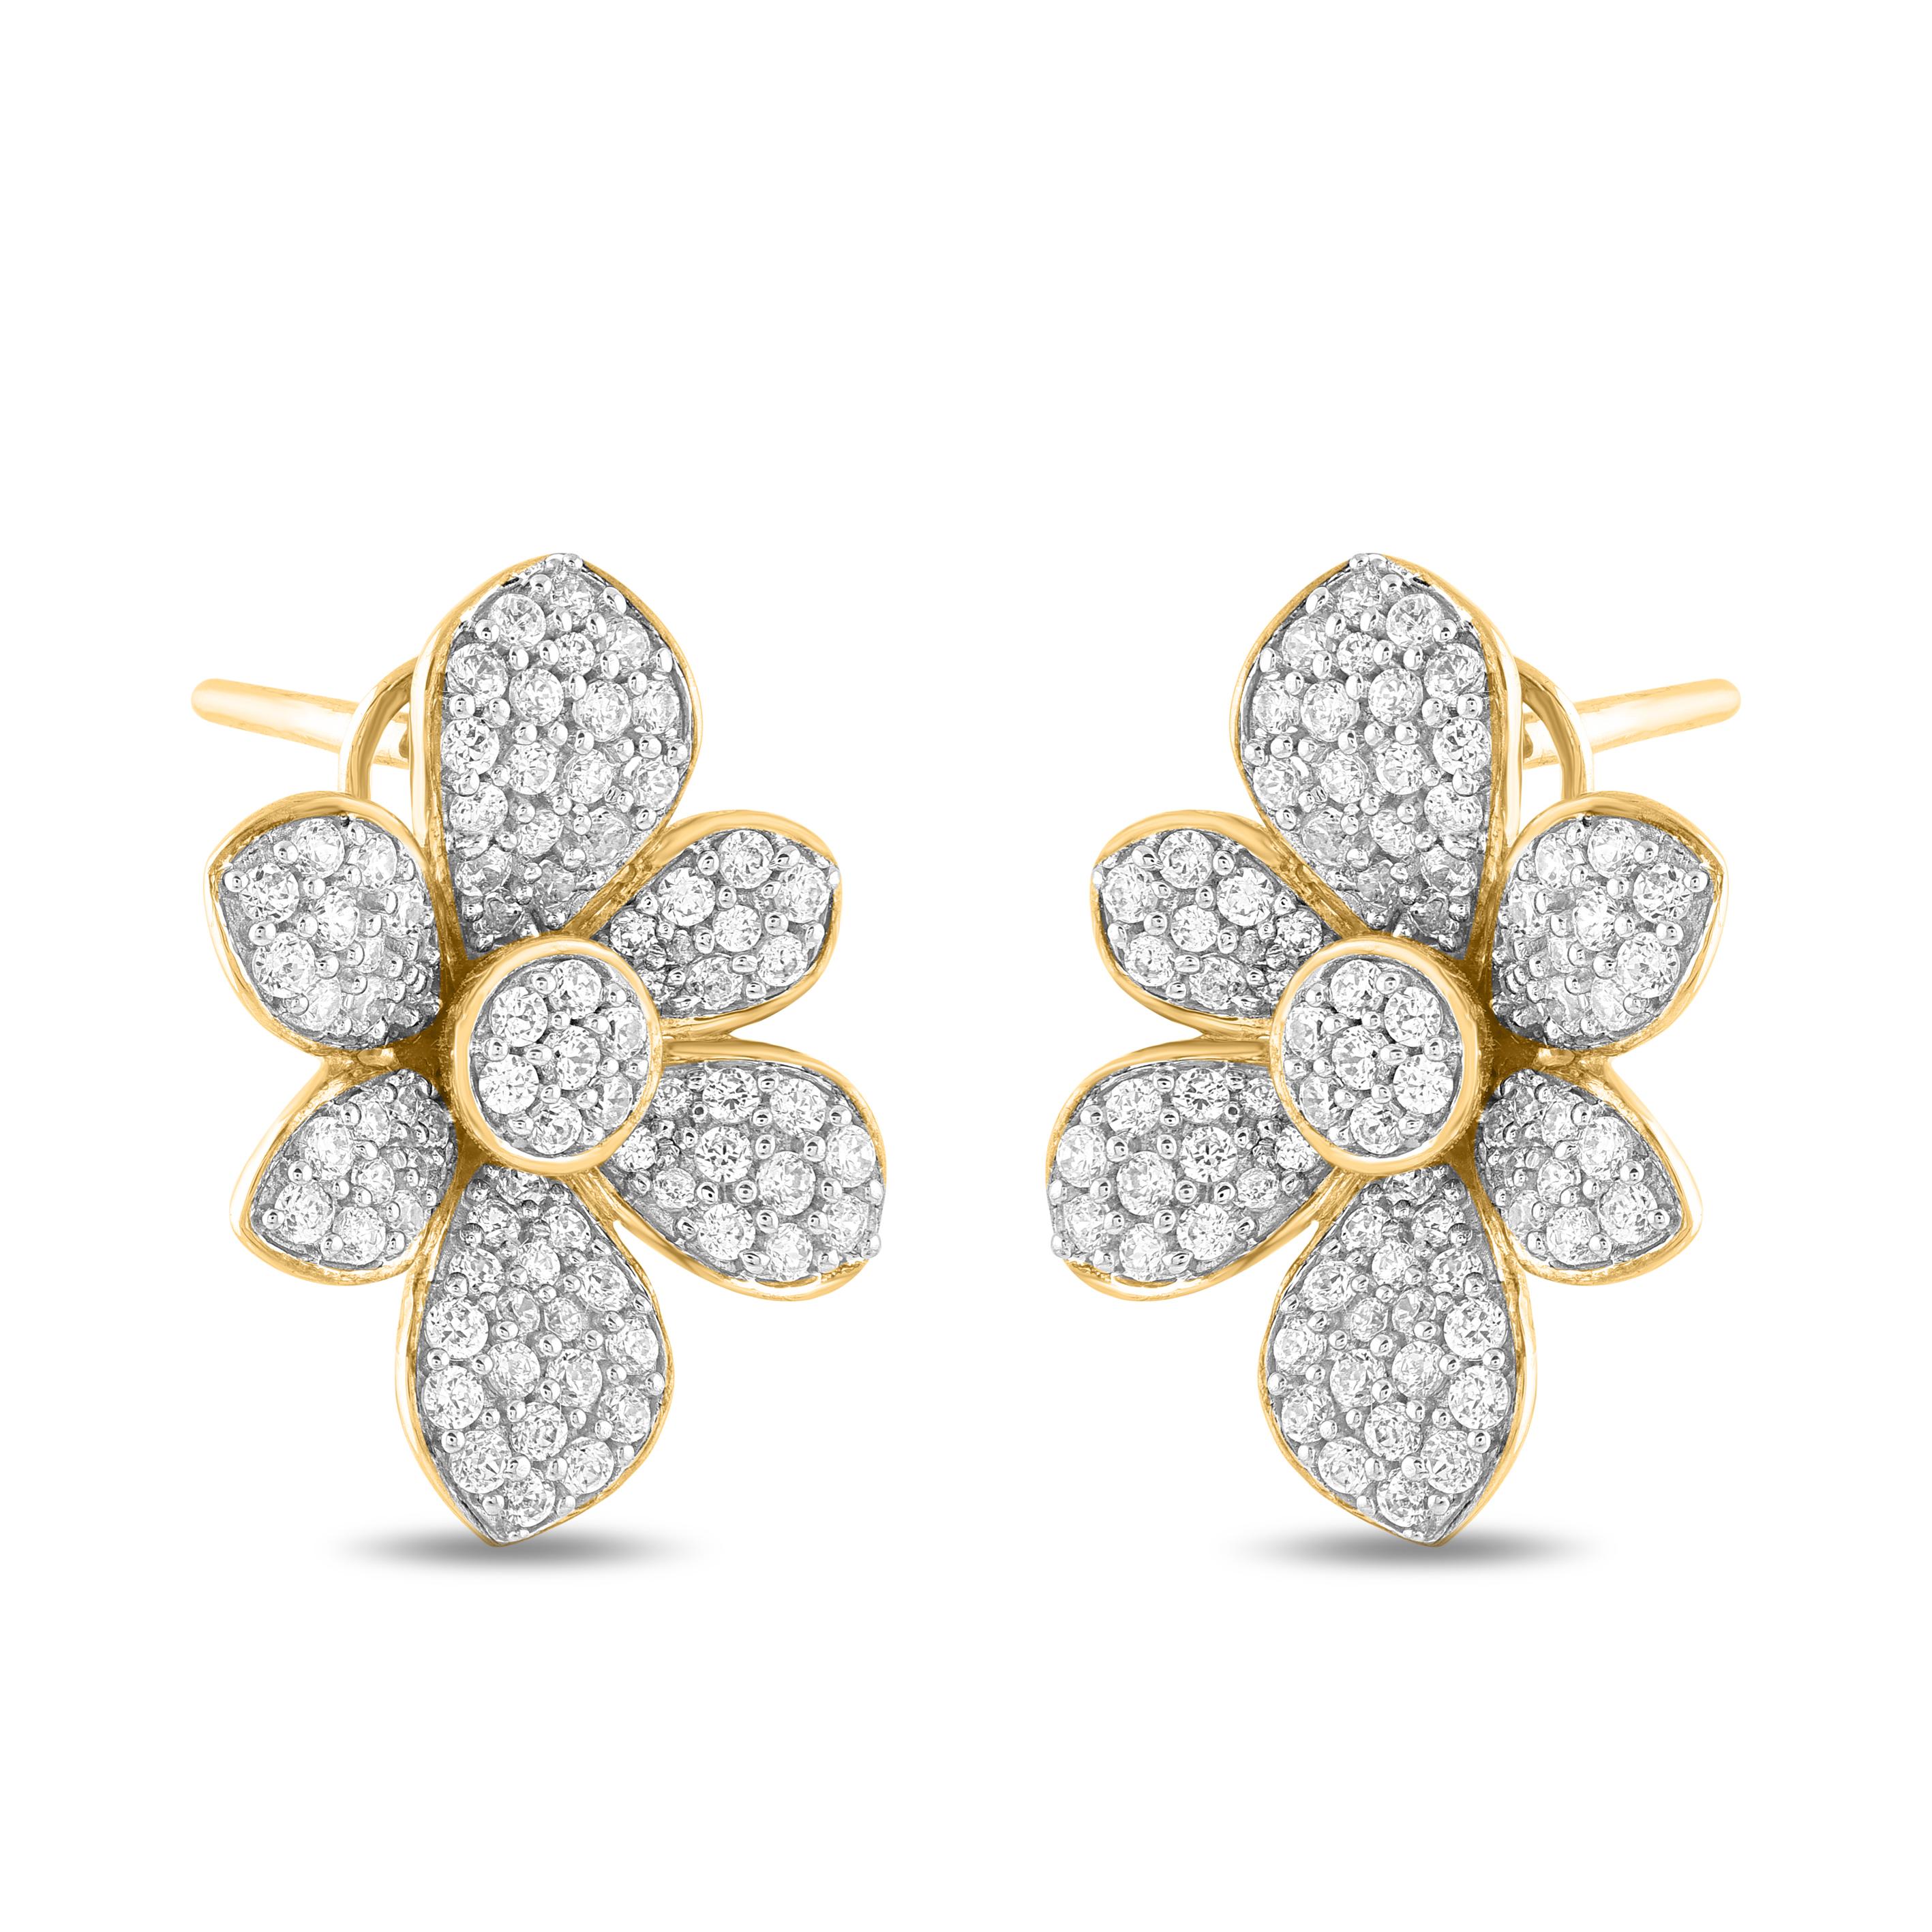 Adorn your casual wear with extra glitz when you put on these floral design stud earrings. Expertly crafted in 14K Yellow Gold, earring is cleverly filled with 168 round diamond set in pave setting and shimmers in H-I color I2 clarity. Captivating